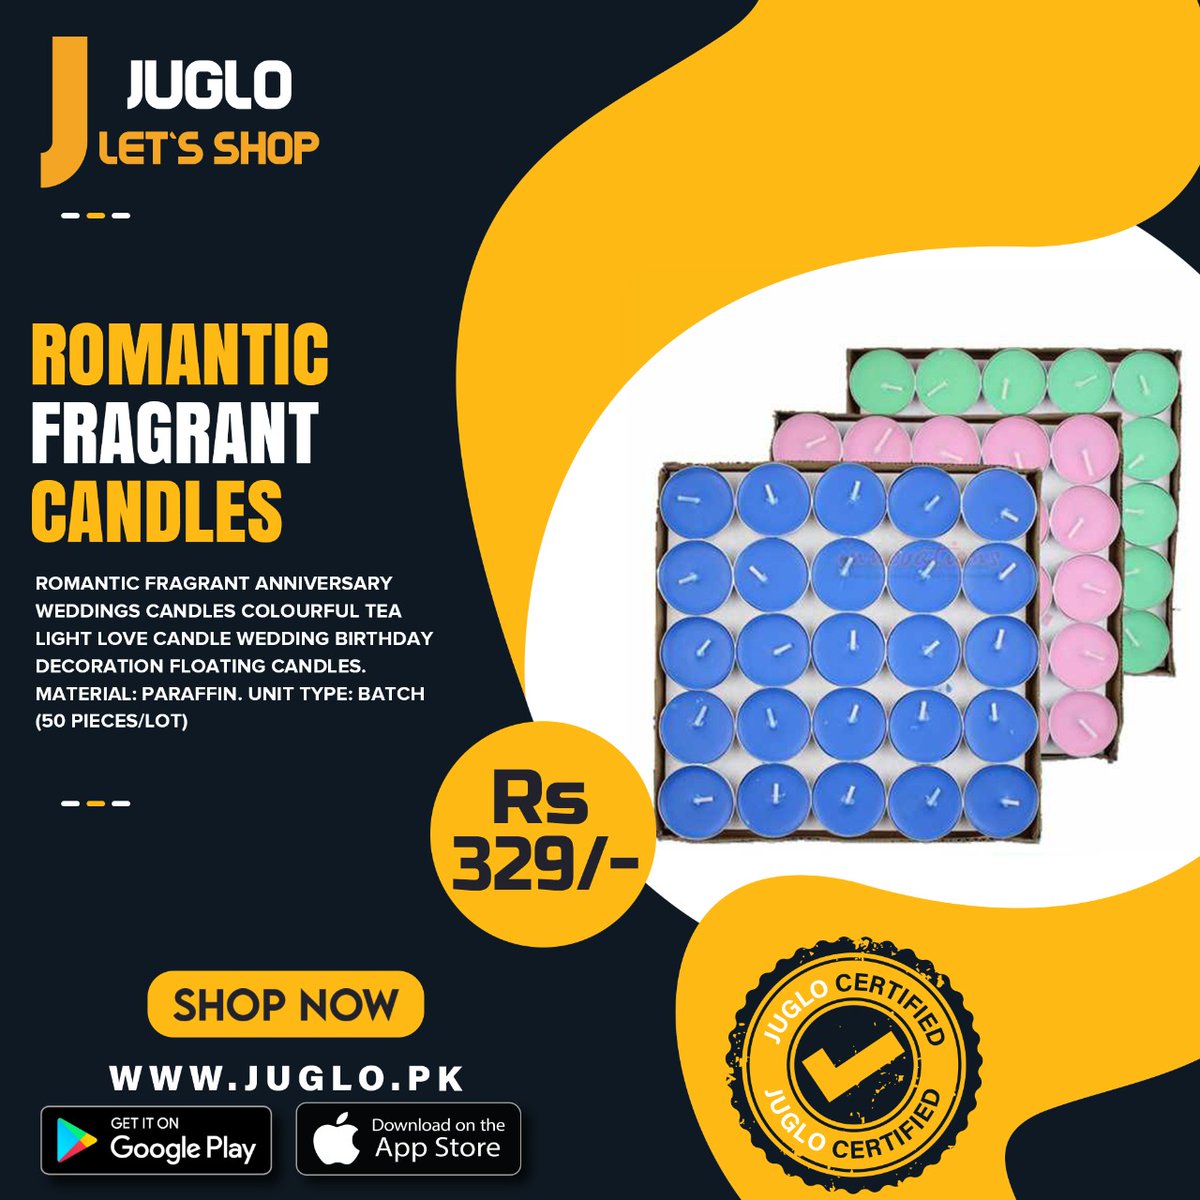 Light Up Your Moments with These Beautiful Candles...
And a Great Choice For Wedding & Birthday Party Decorations!!!
juglo.pk/romantic-fragr…
#juglopk #shopping #onlineshopping #candles #candlelight #decoration #decor #floatingcandles #decorationideas